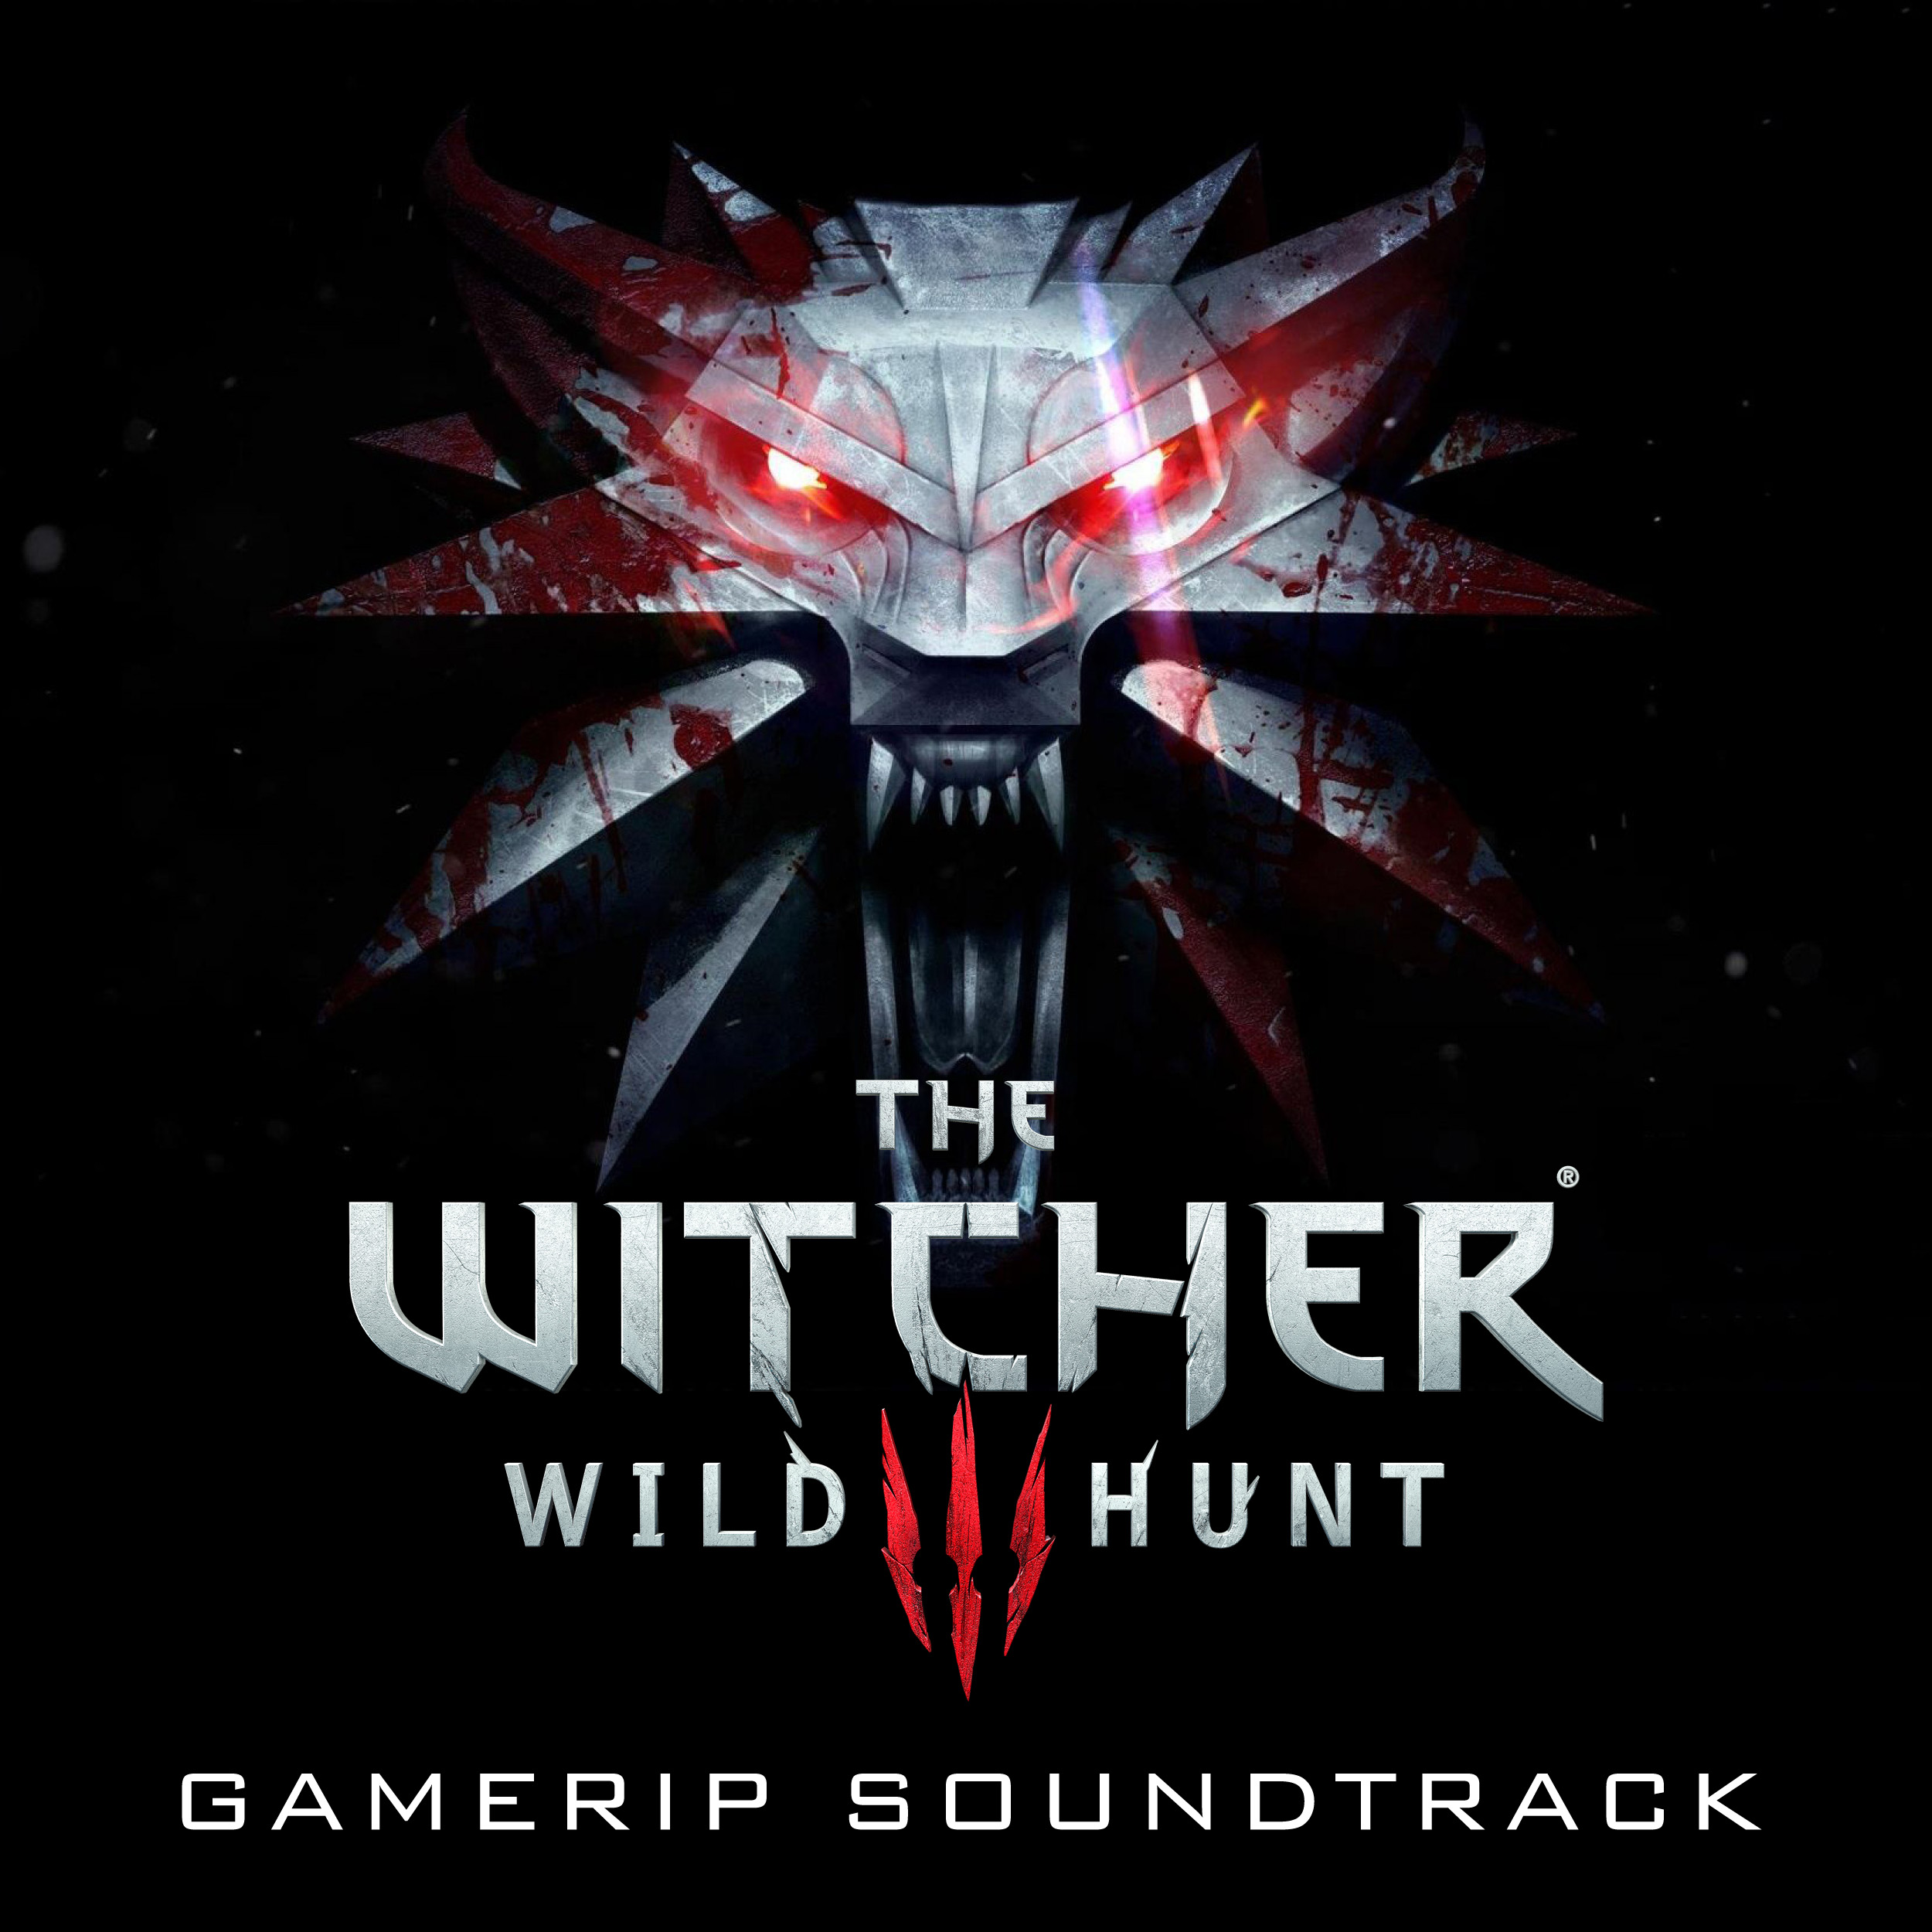 Download the witcher 3 soundtrack фото 1